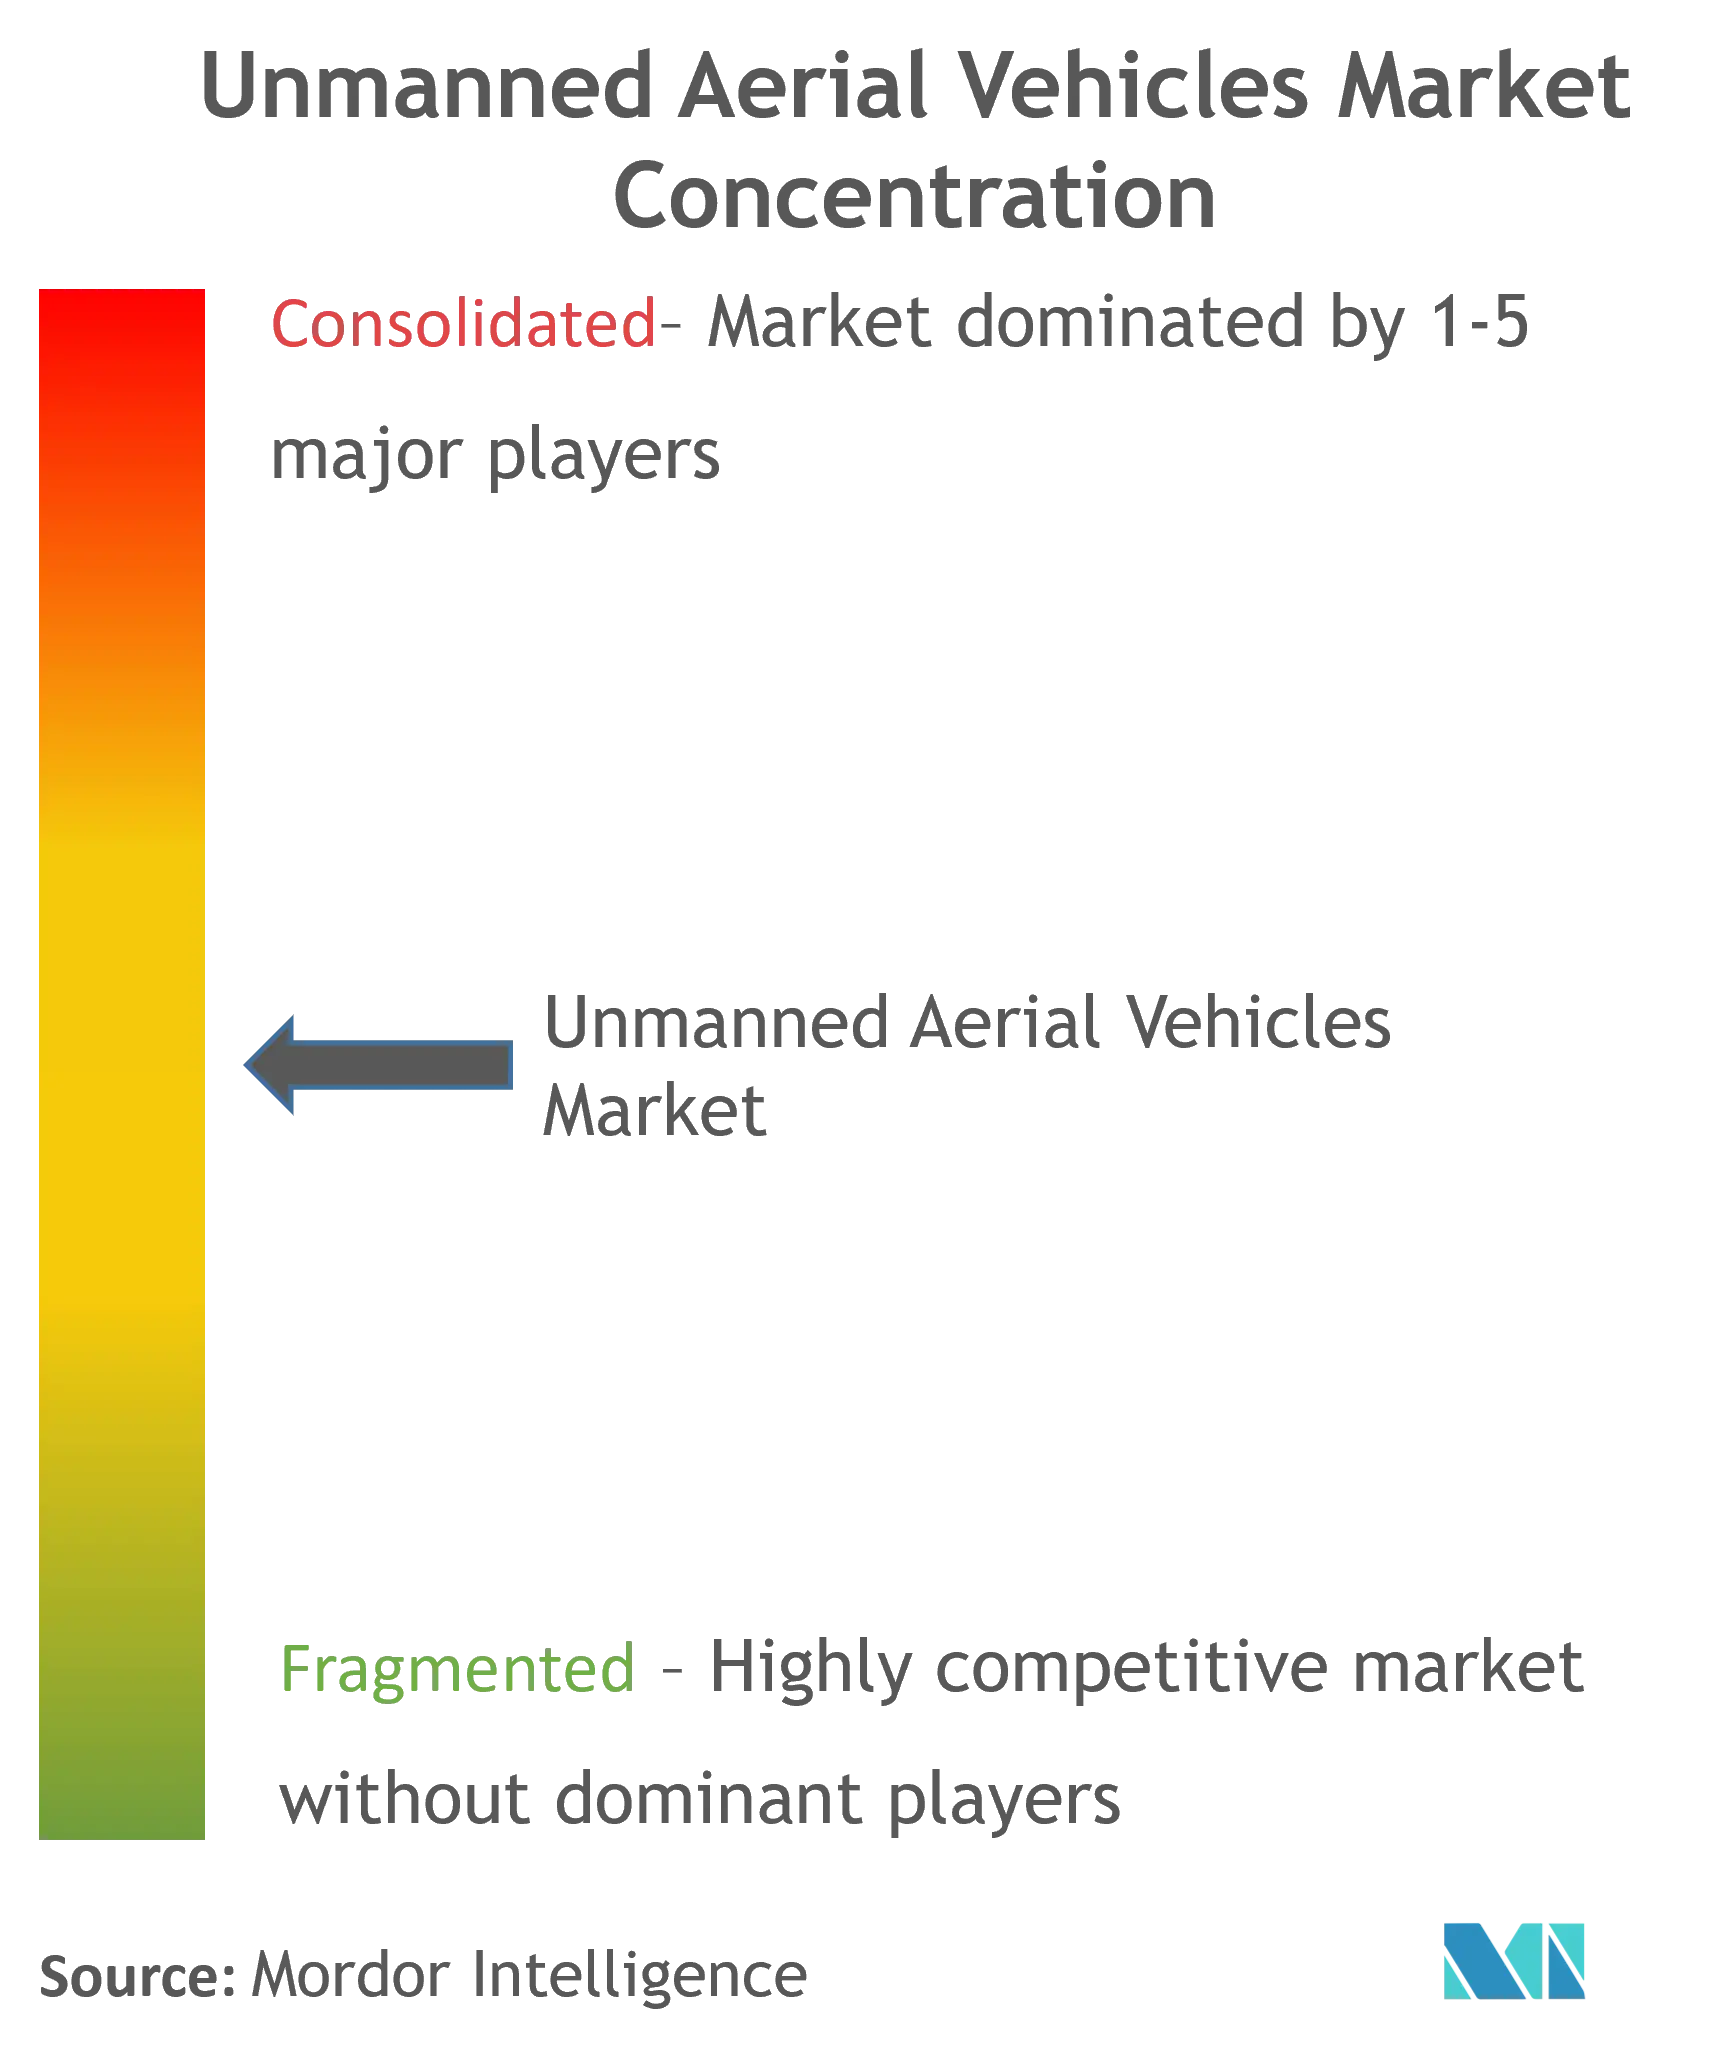 Unmanned Aerial Vehicles Market Concentration